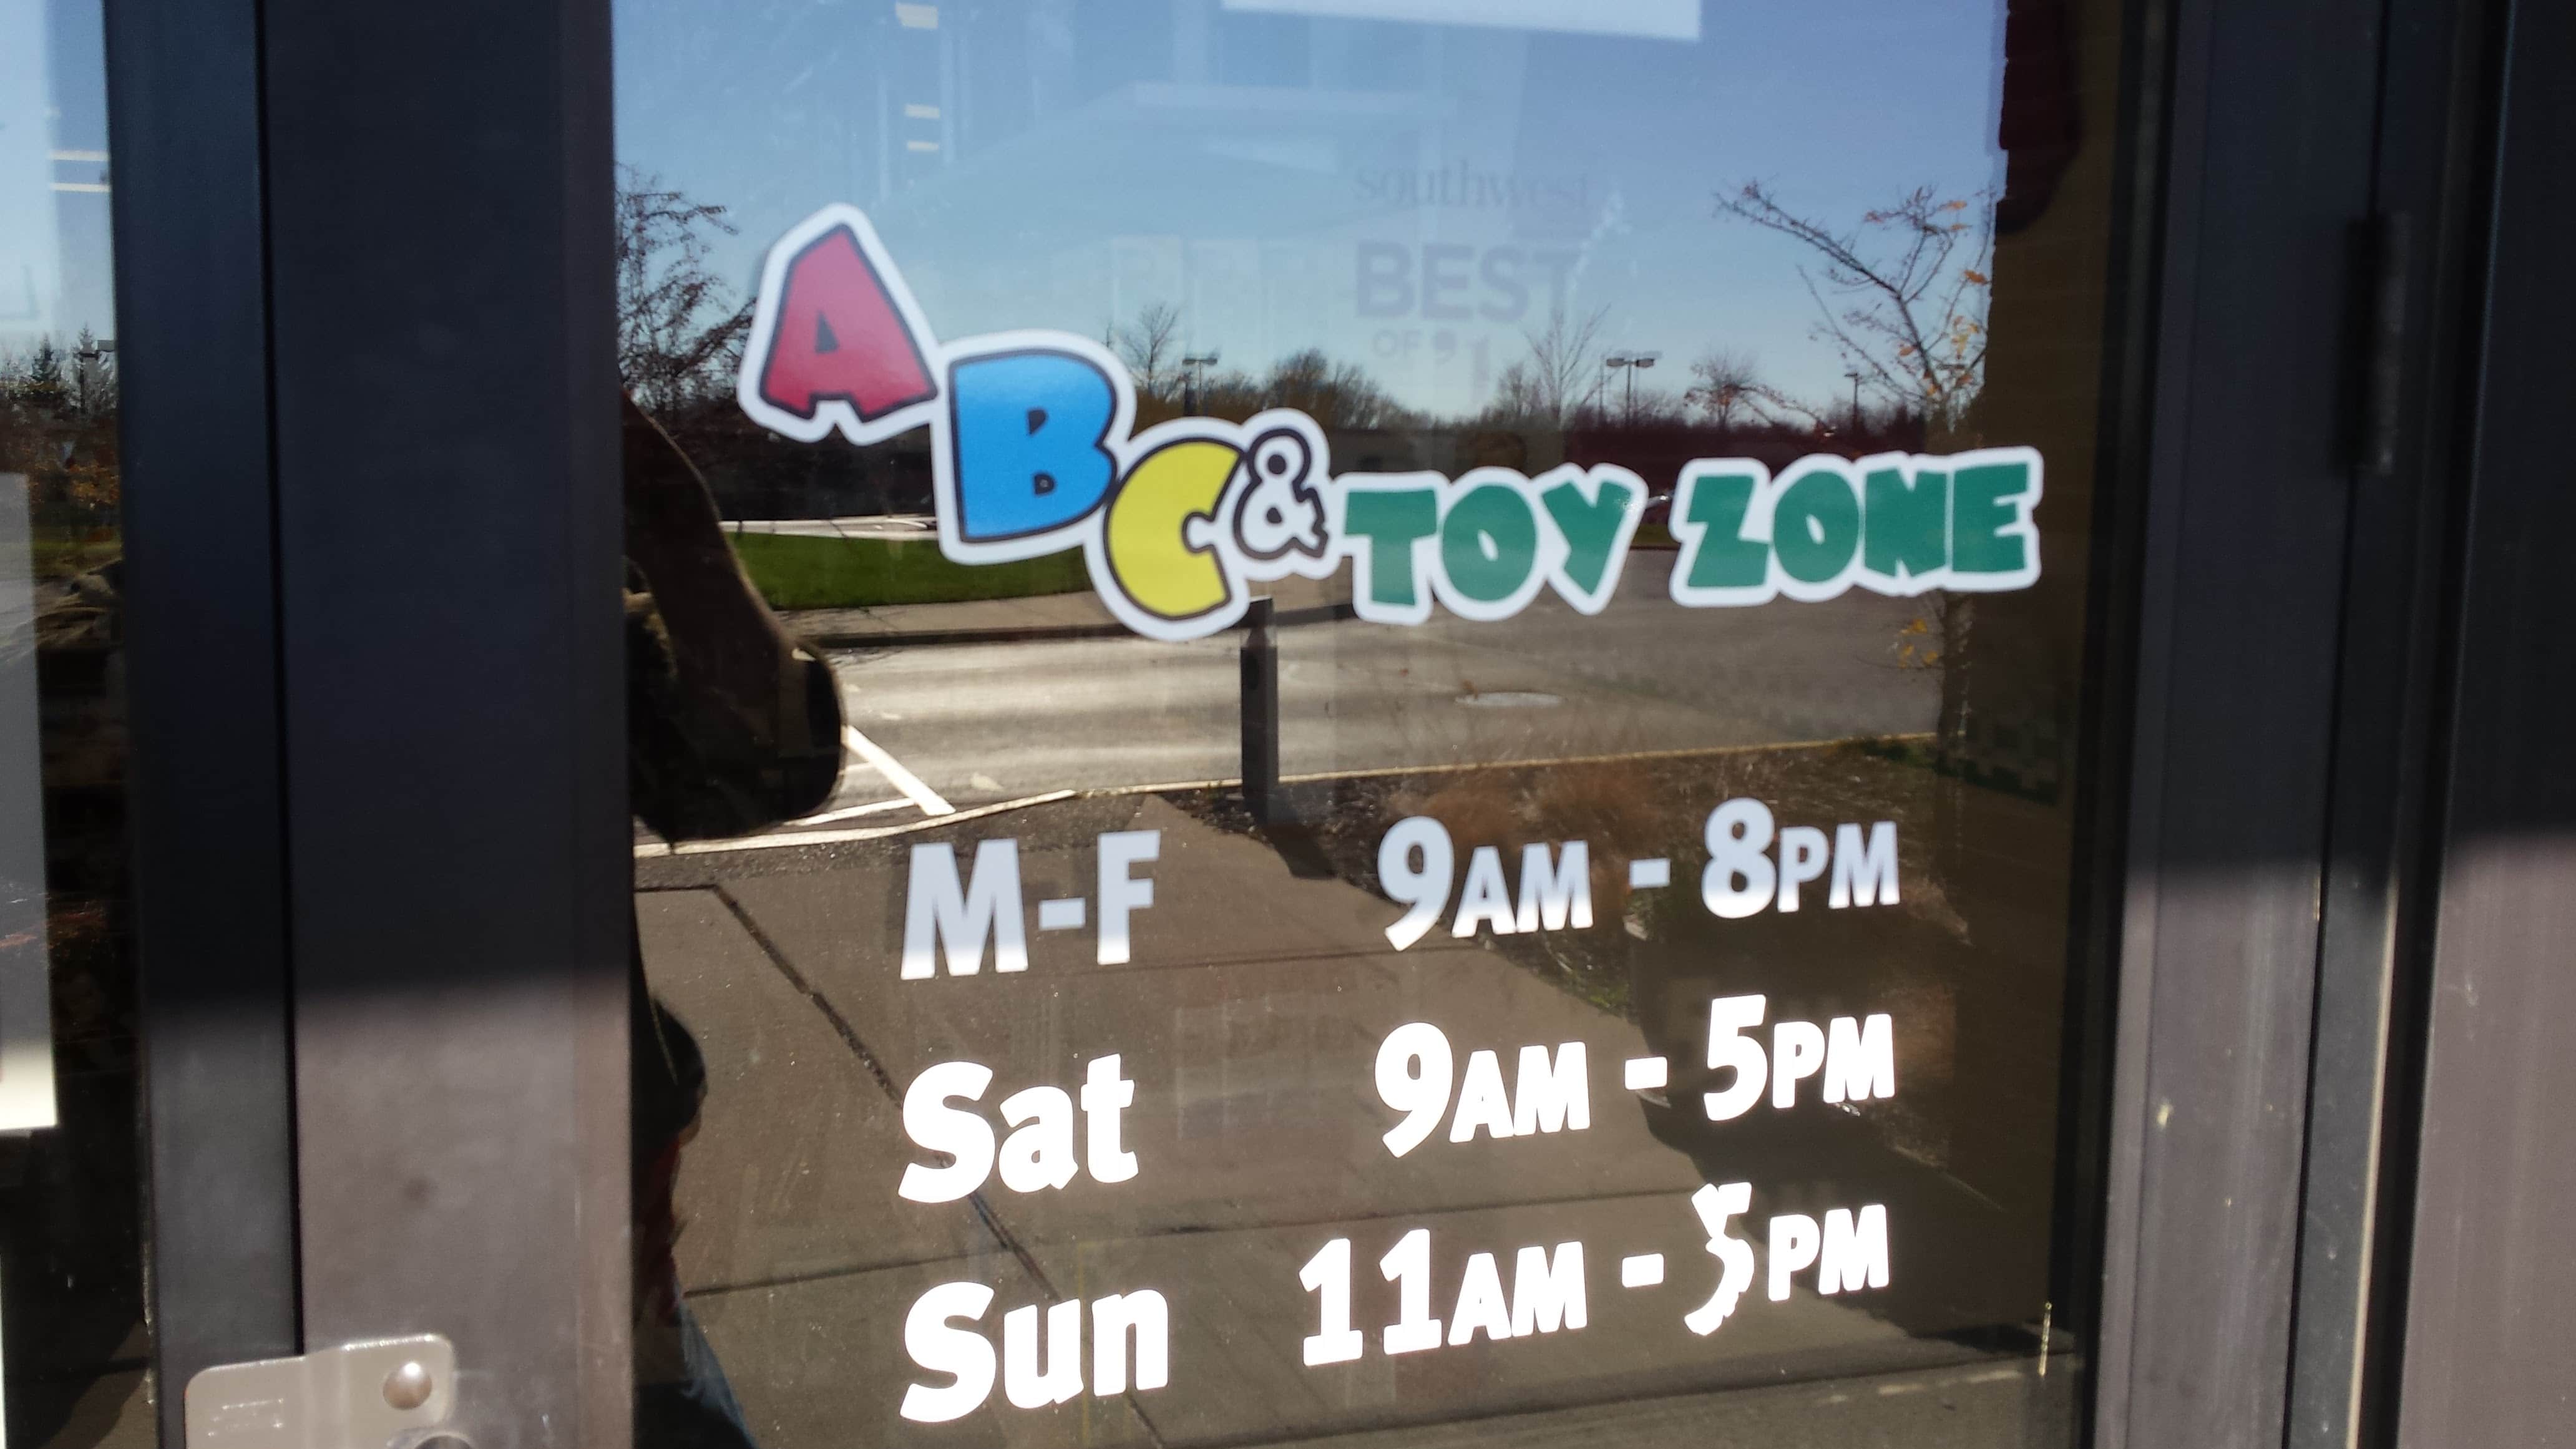 Hours at ABC Toy Zone